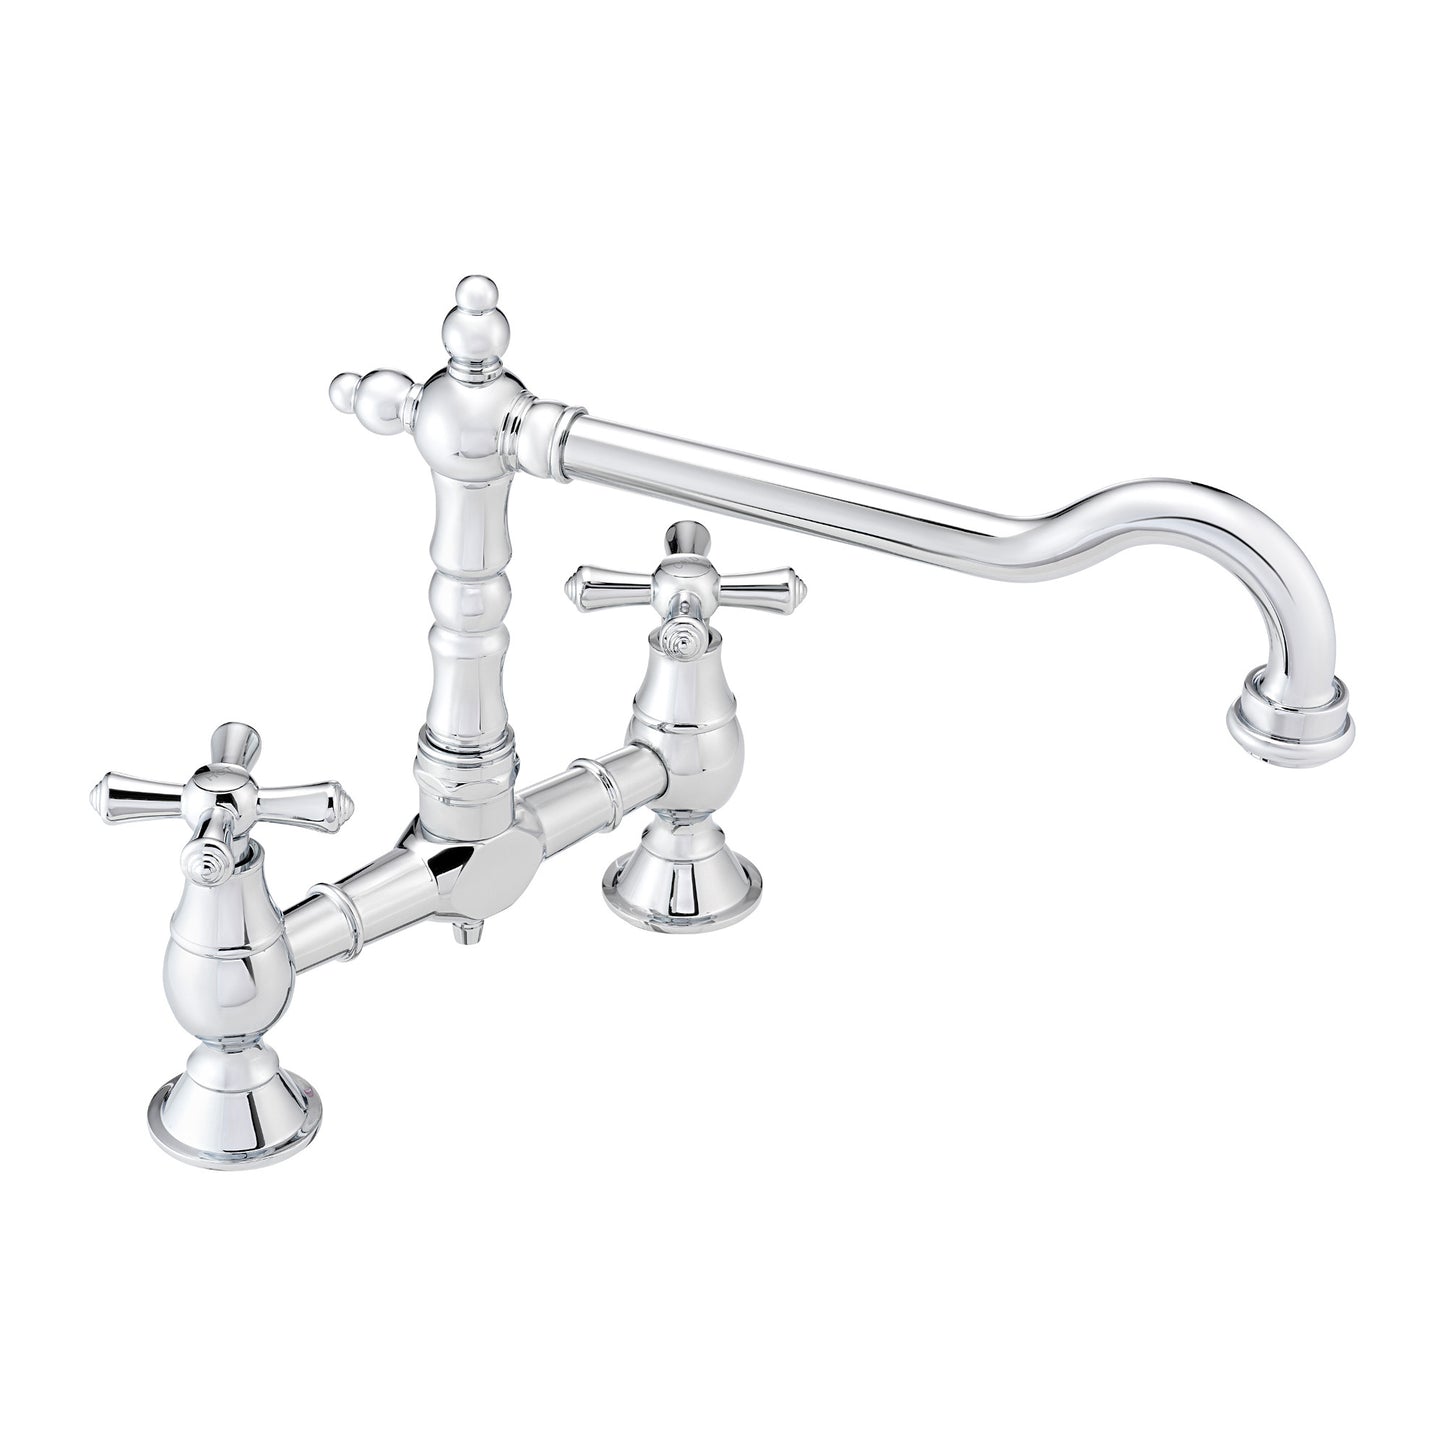 Langley traditional bridge kitchen sink mixer tap colonial crosshead - chrome